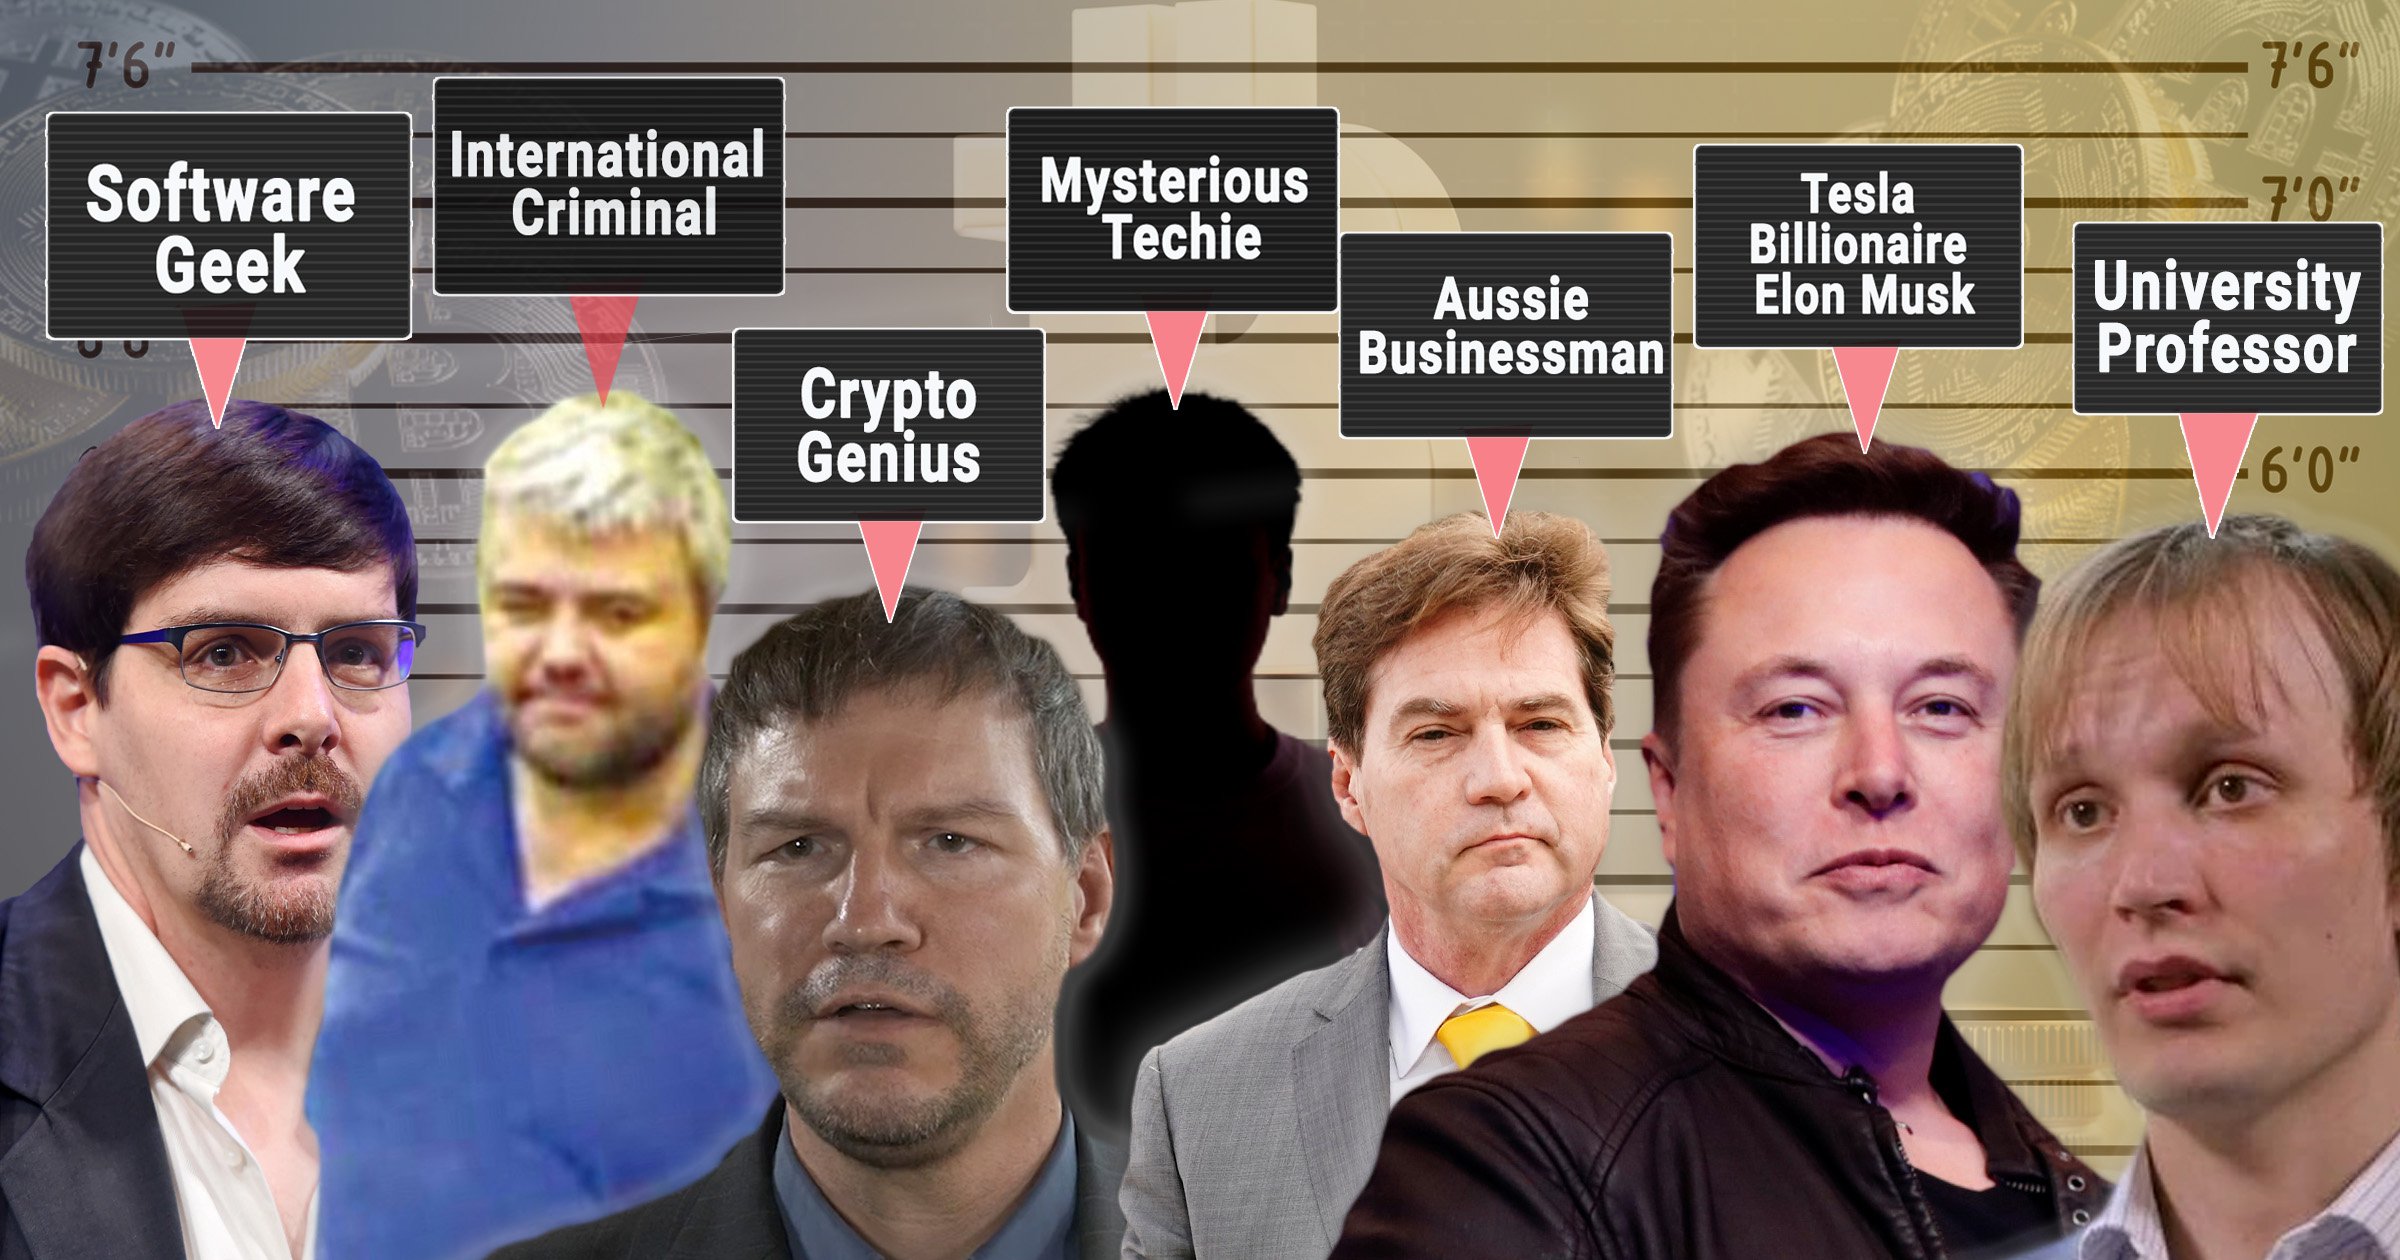 Who’s the Inventor of Bitcoin?